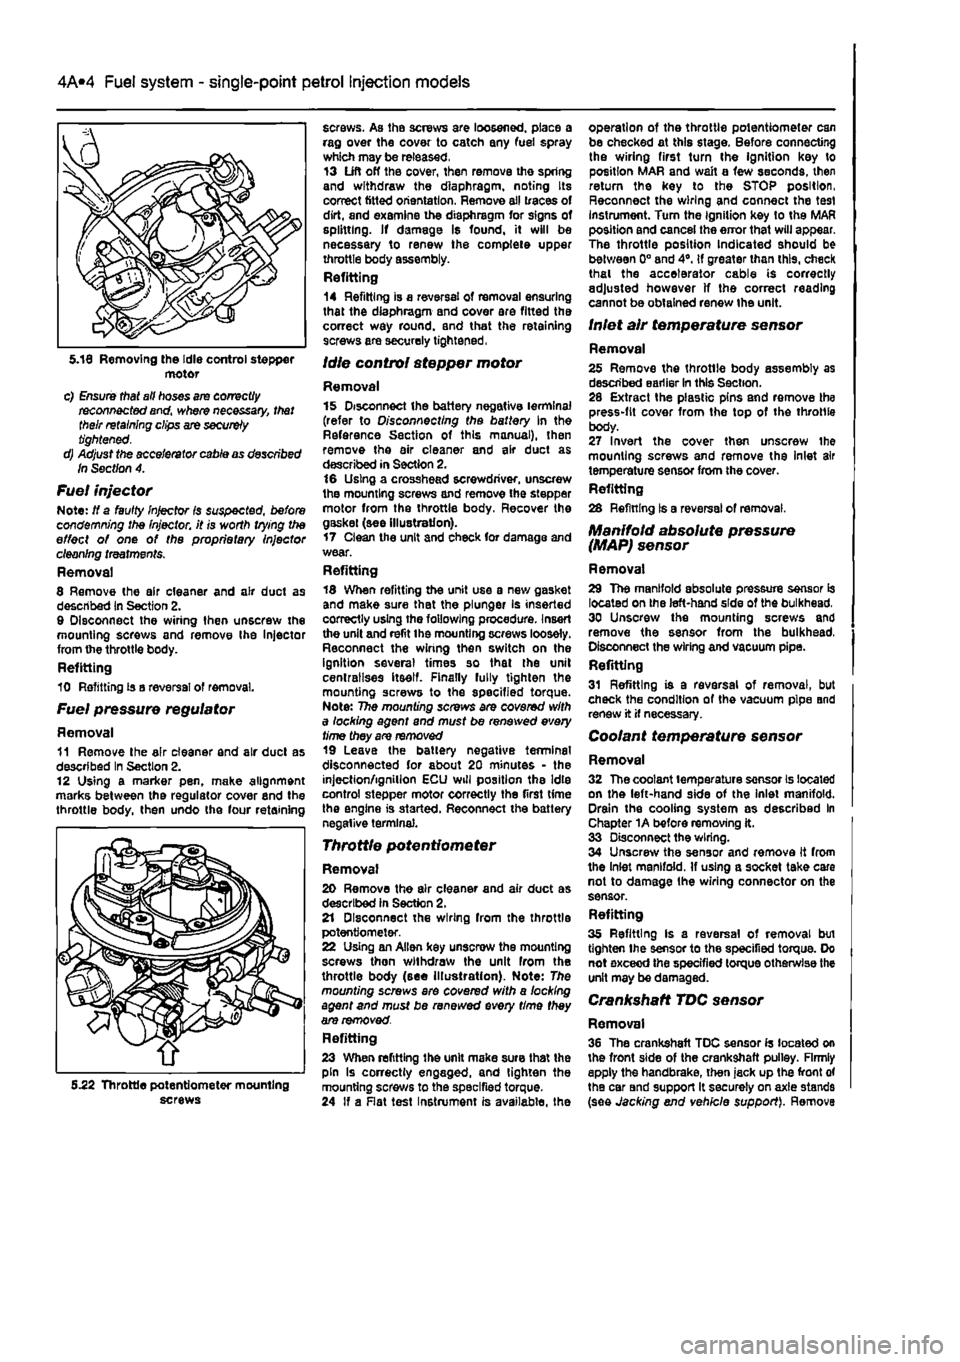 FIAT PUNTO 1994 176 / 1.G Workshop Manual 
4A*2 Fuel system - single-point petrol Injection models 
motor c) Ensure that all hoses are correctly reconnected and, where necessary, that their retaining clips are securely tightened. d) Adjust th